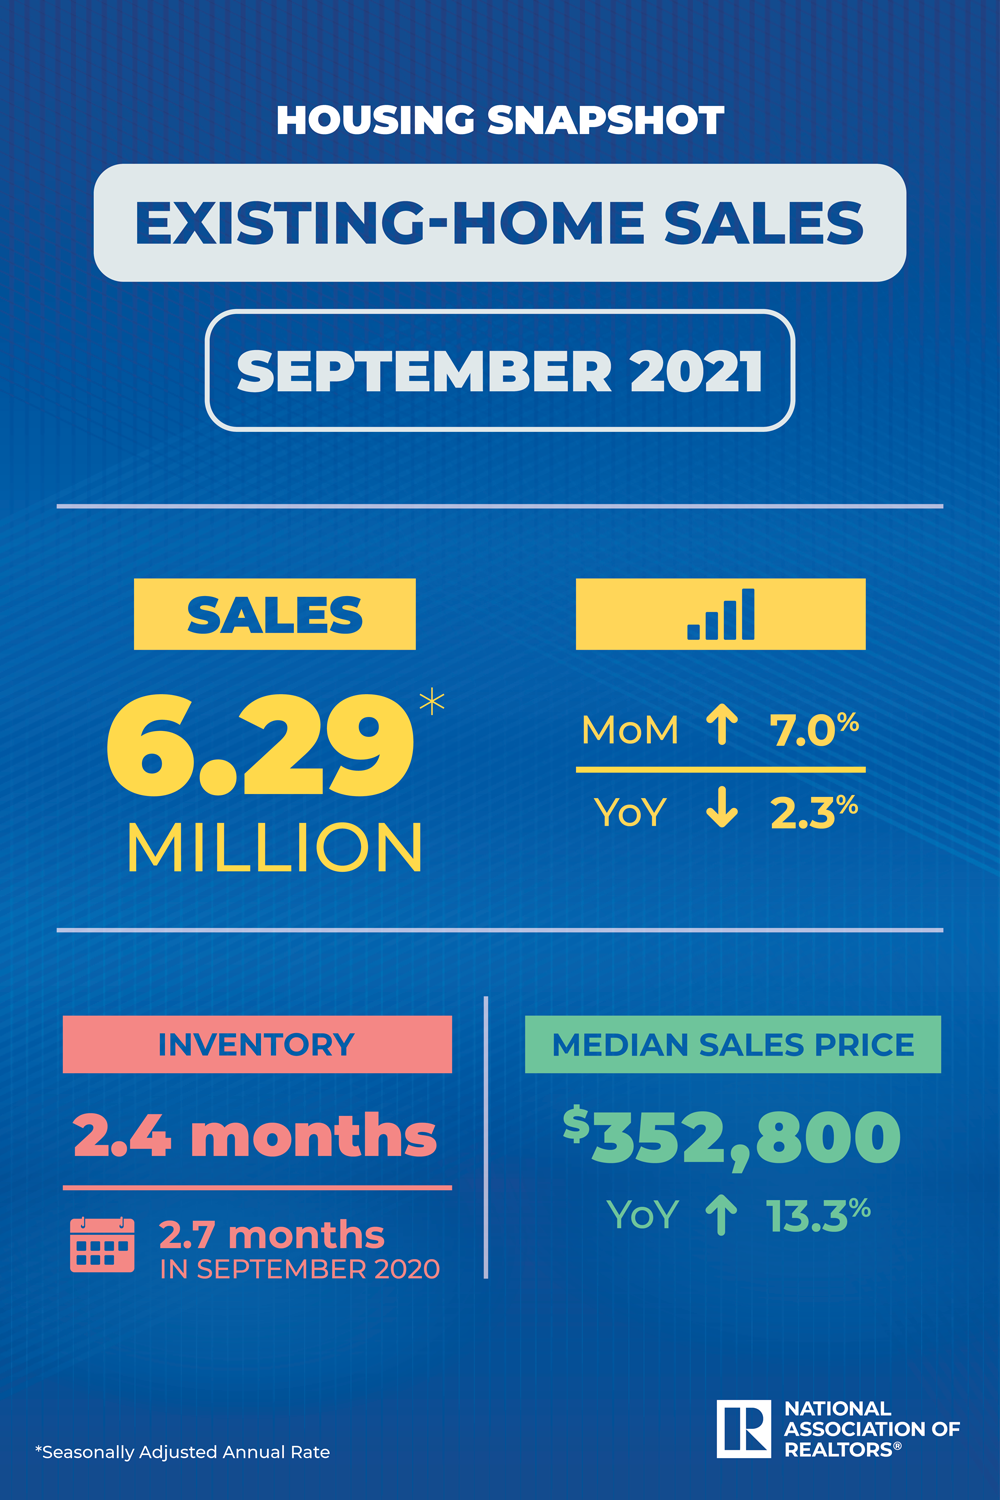 A graphic showing the breakdown of existing-home sales for September of this year.